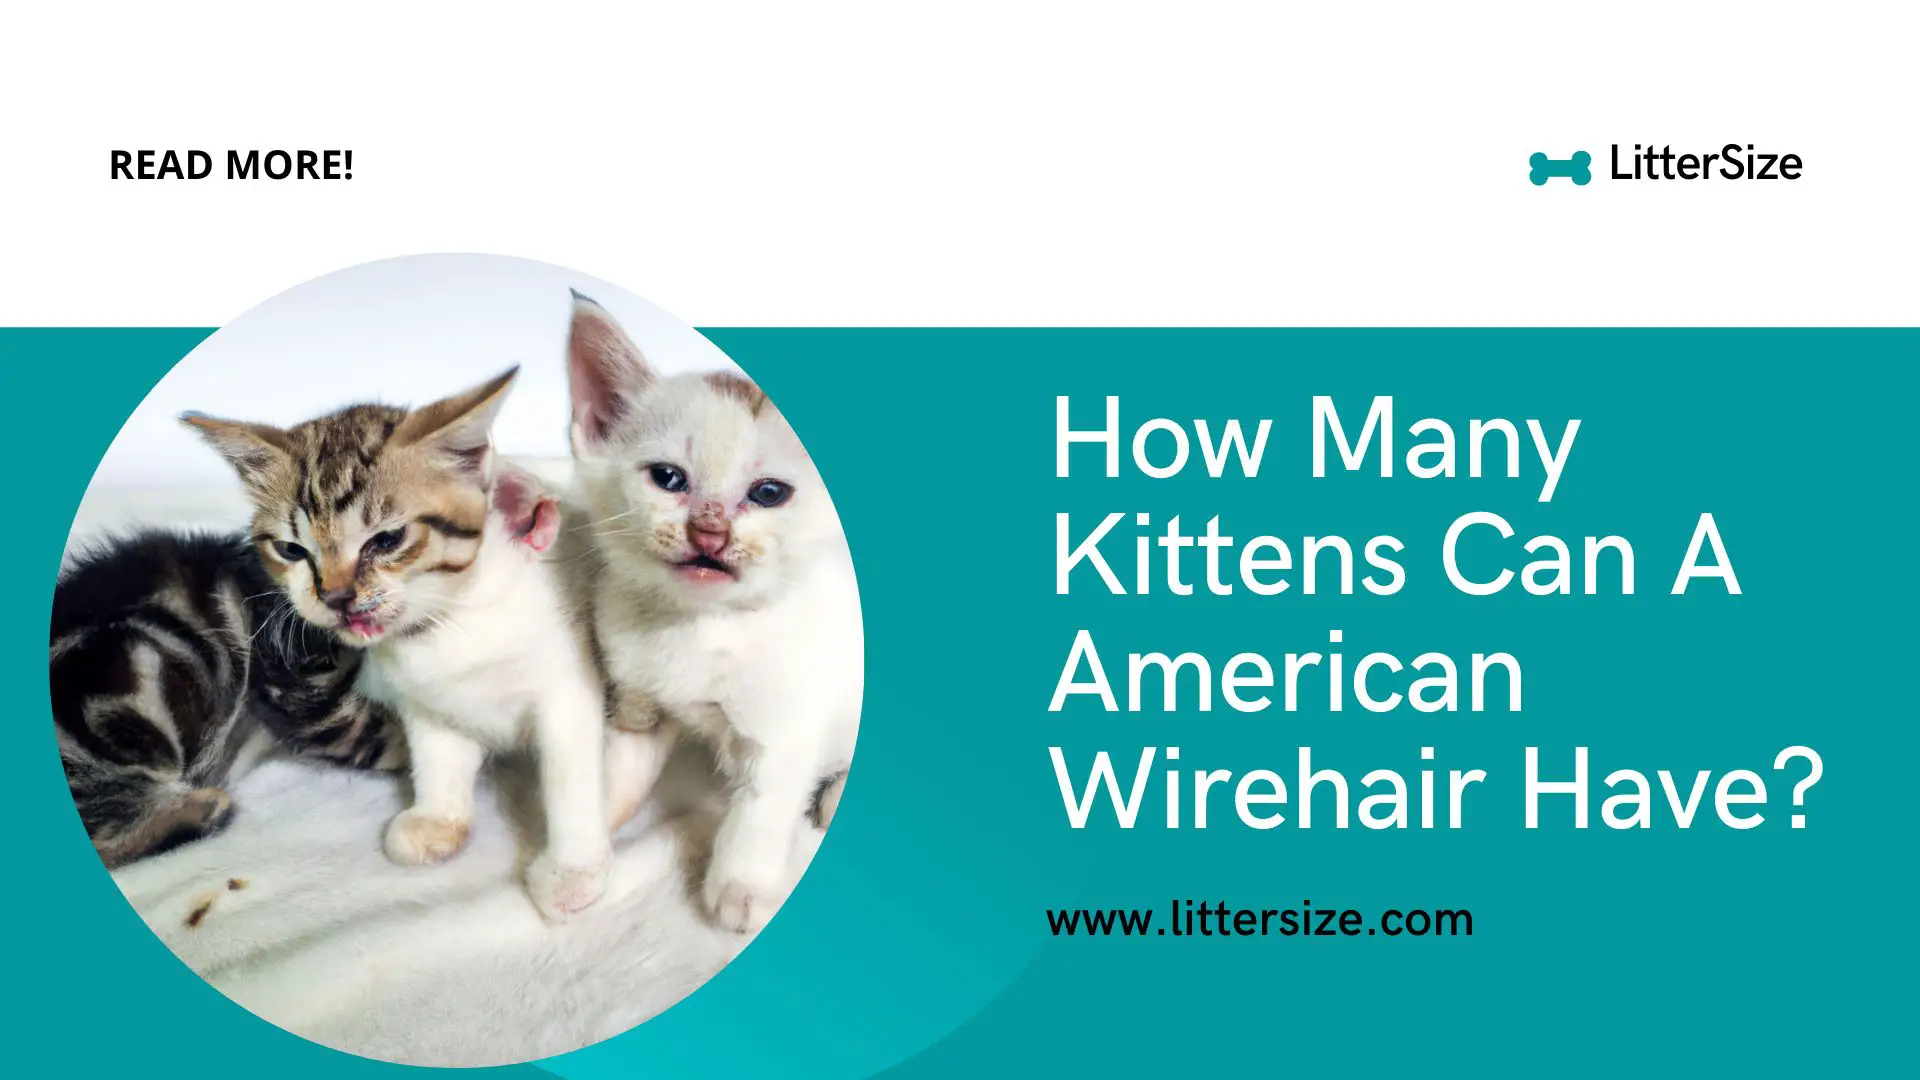 How Many Kittens Can A American Wirehair Have?